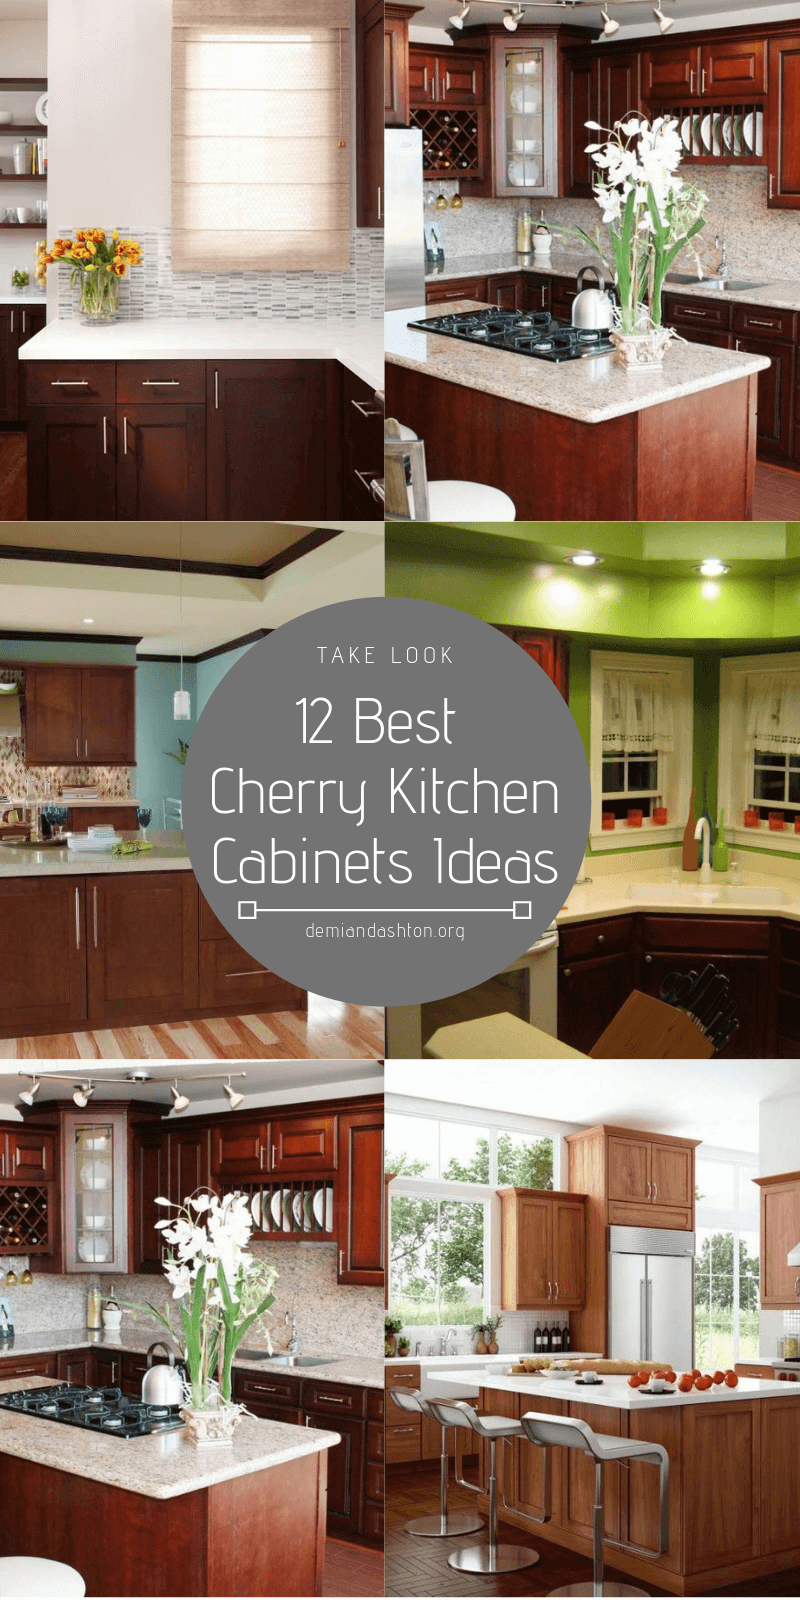 18 Best Cherry Kitchen Cabinets Ideas You'll See More of This Year ...